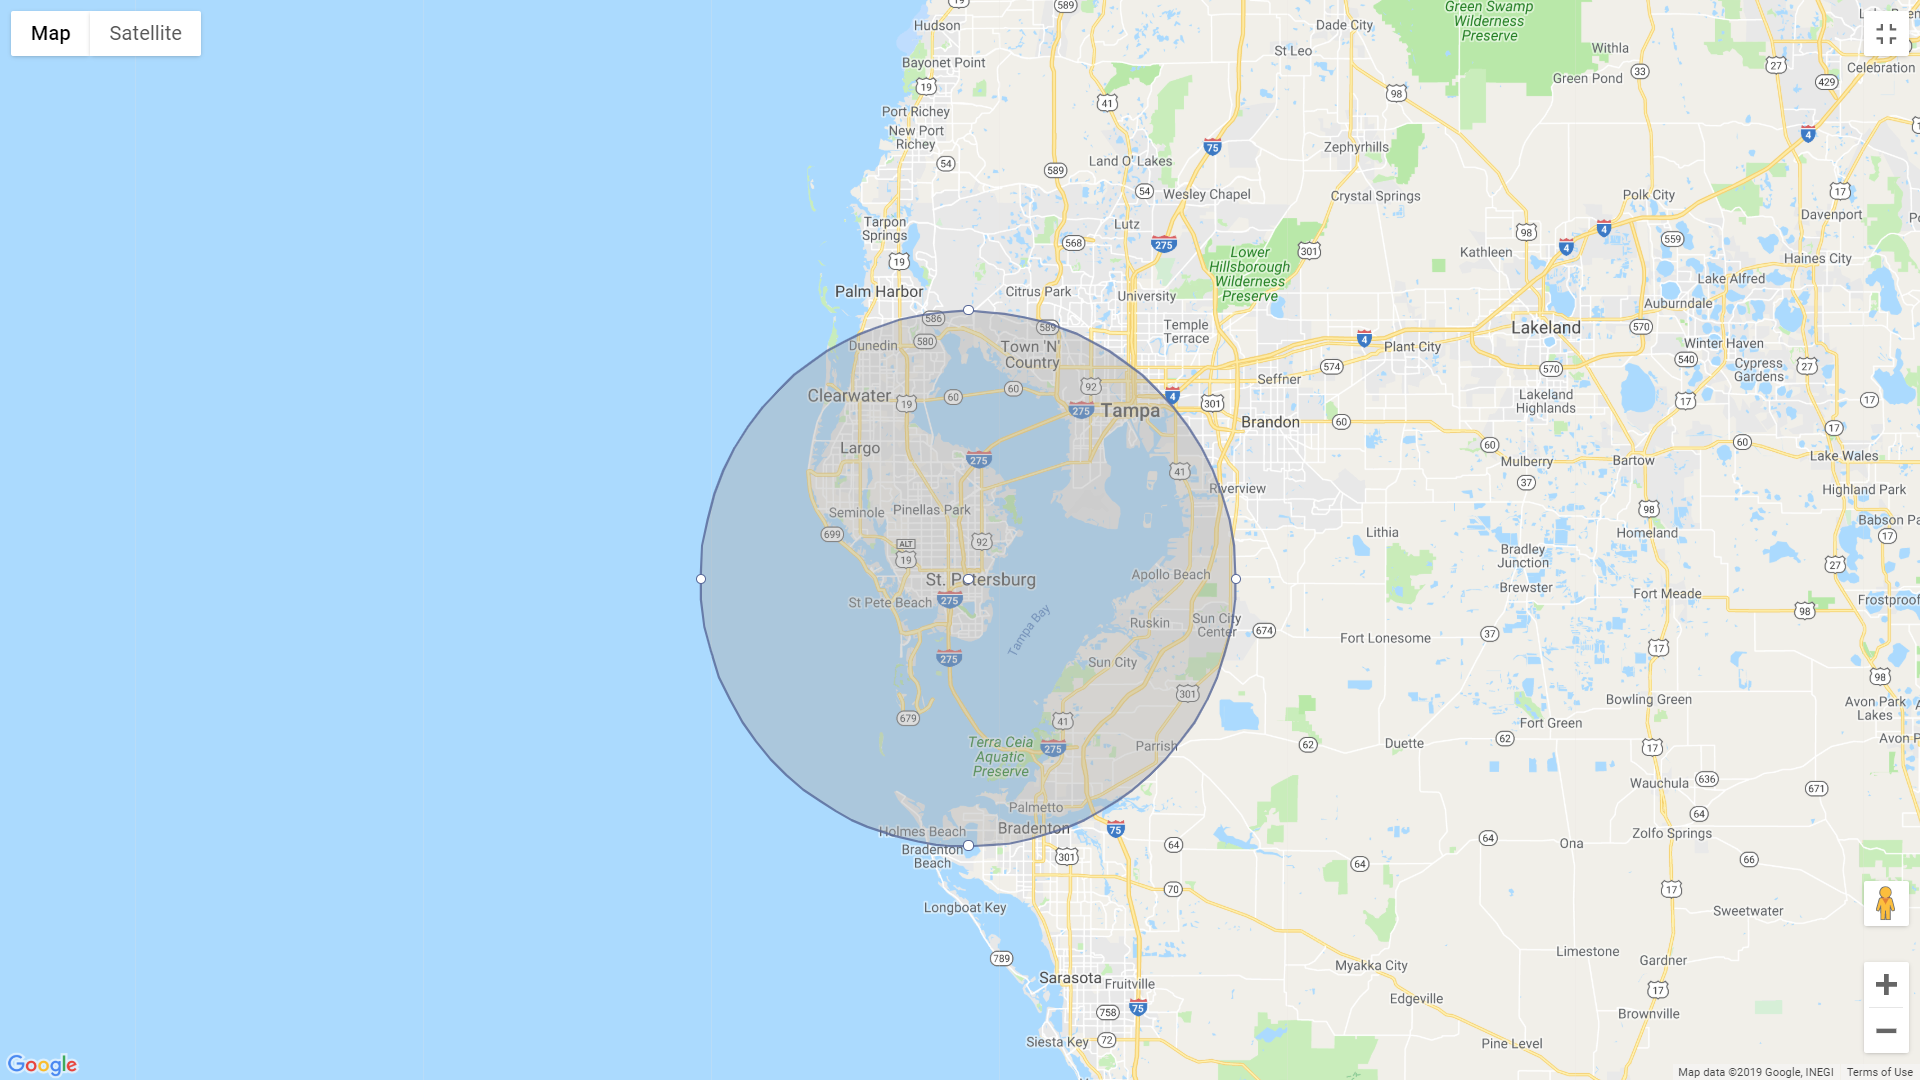 A radius circle around Tropicana Field showing how much is relatively close.